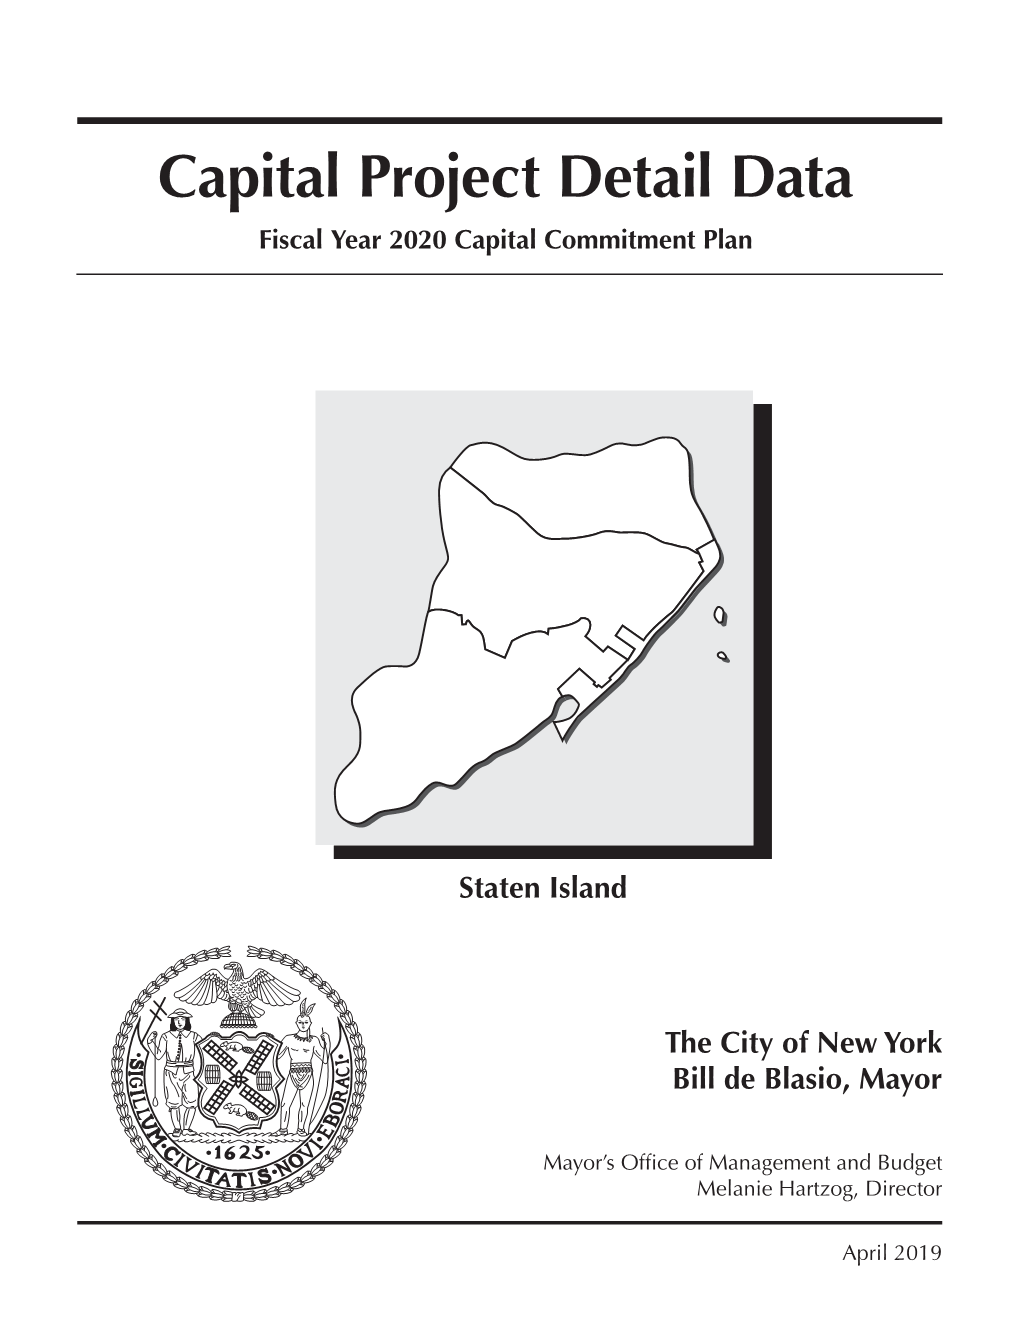 Capital Project Detail Data Fiscal Year 2020 Capital Commitment Plan